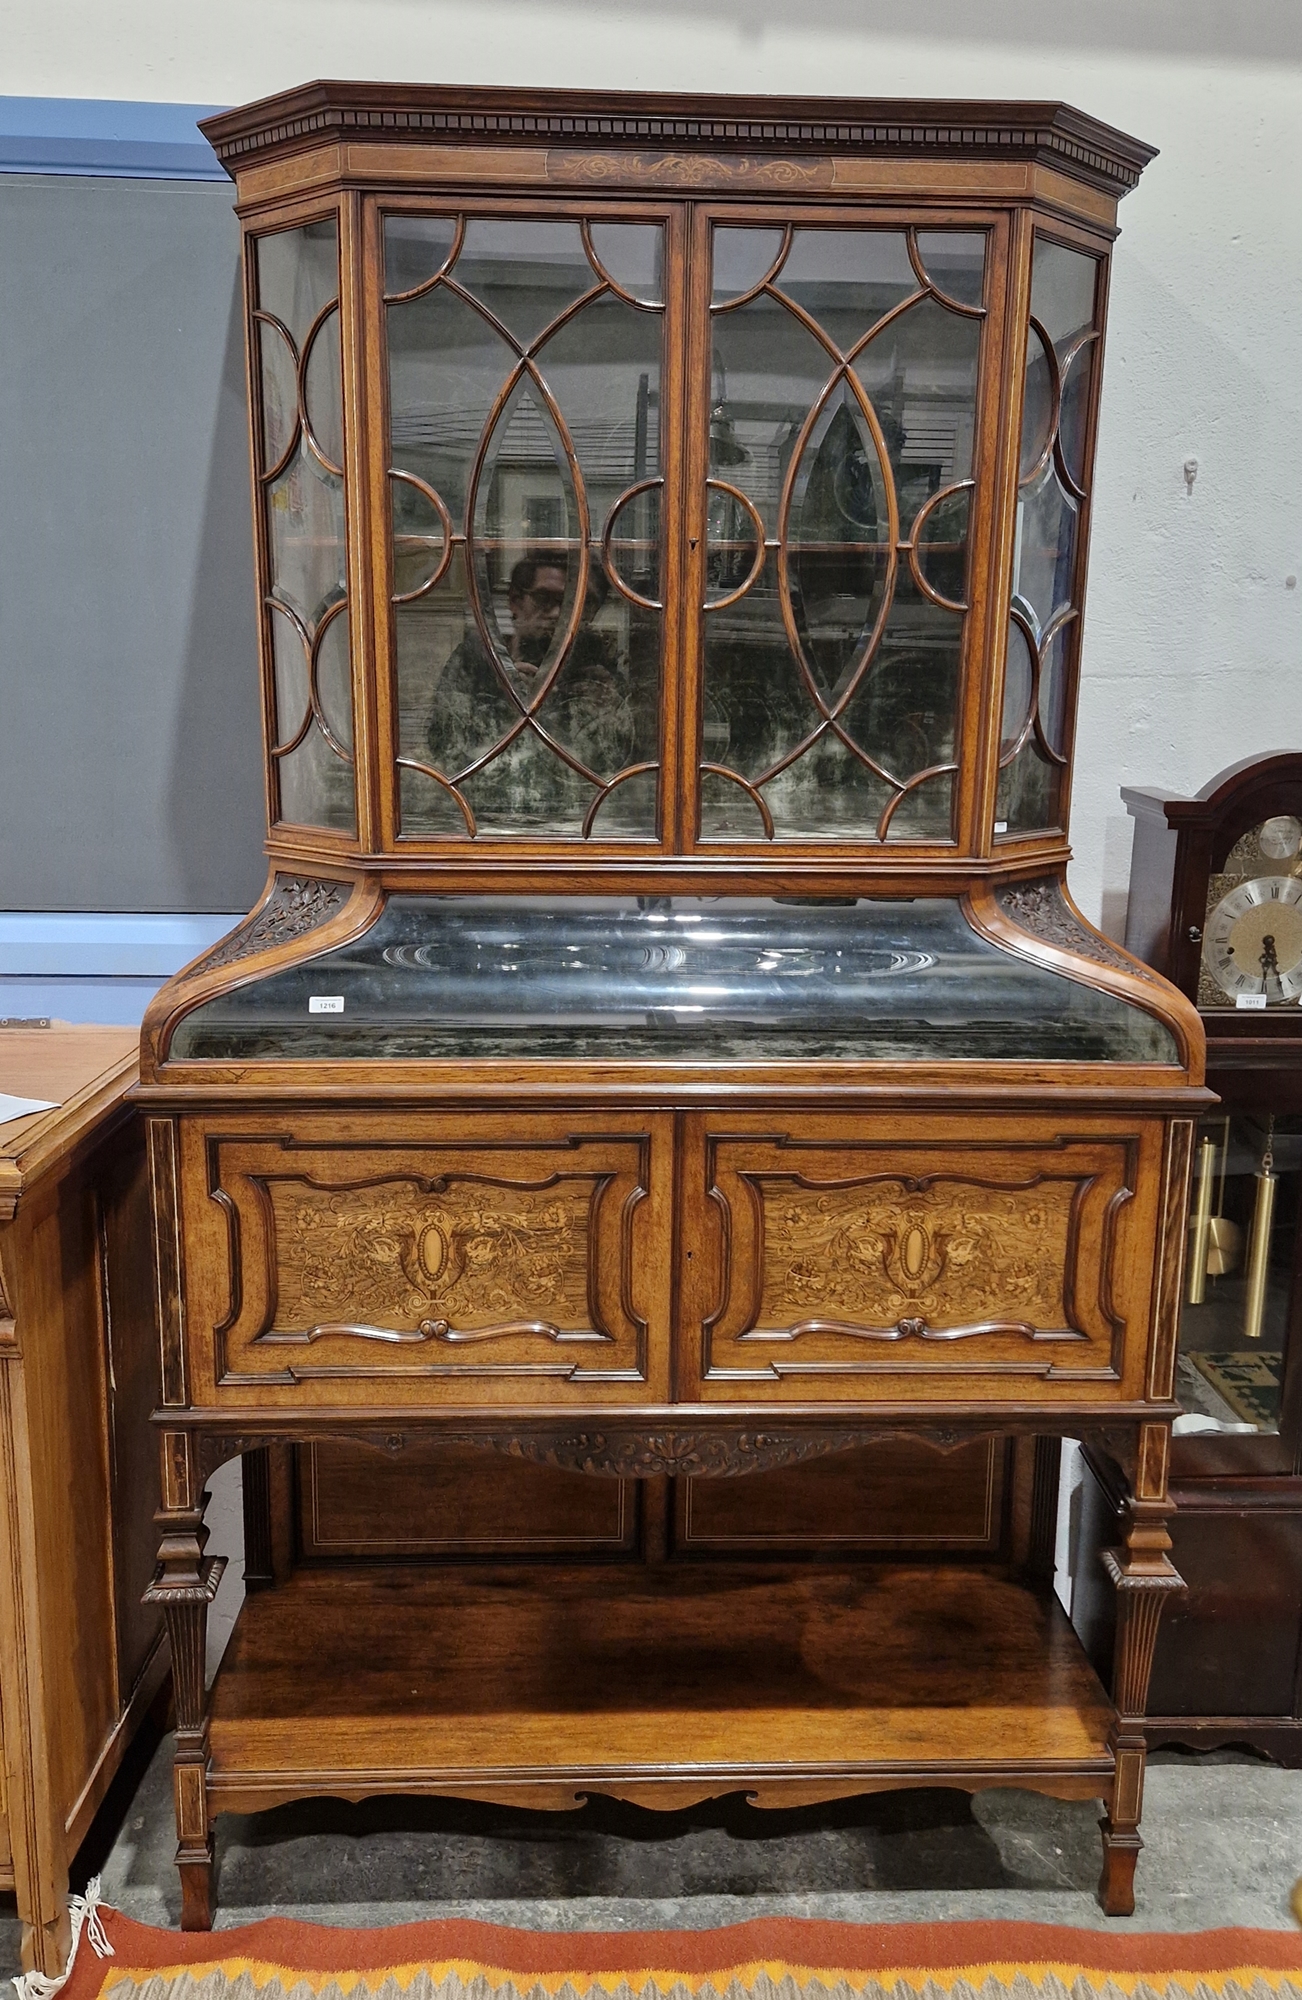 Victorian inlaid rosewood display cabinet, marked with maker's label 'Marris and Norton, Corporation - Image 2 of 2